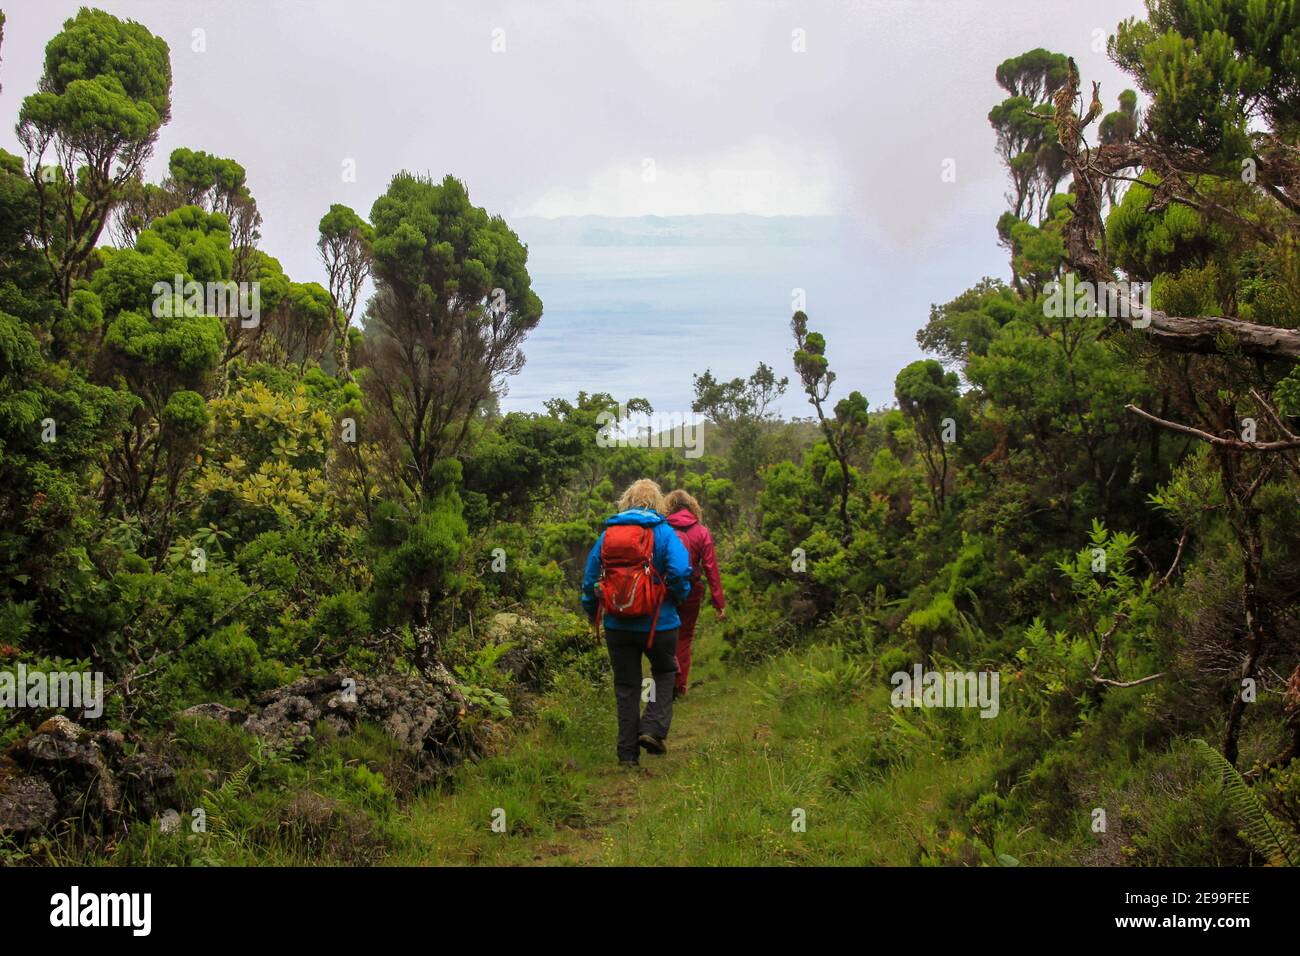 Hiking group, exploring green landscapes, Azores, Pico island. Stock Photo